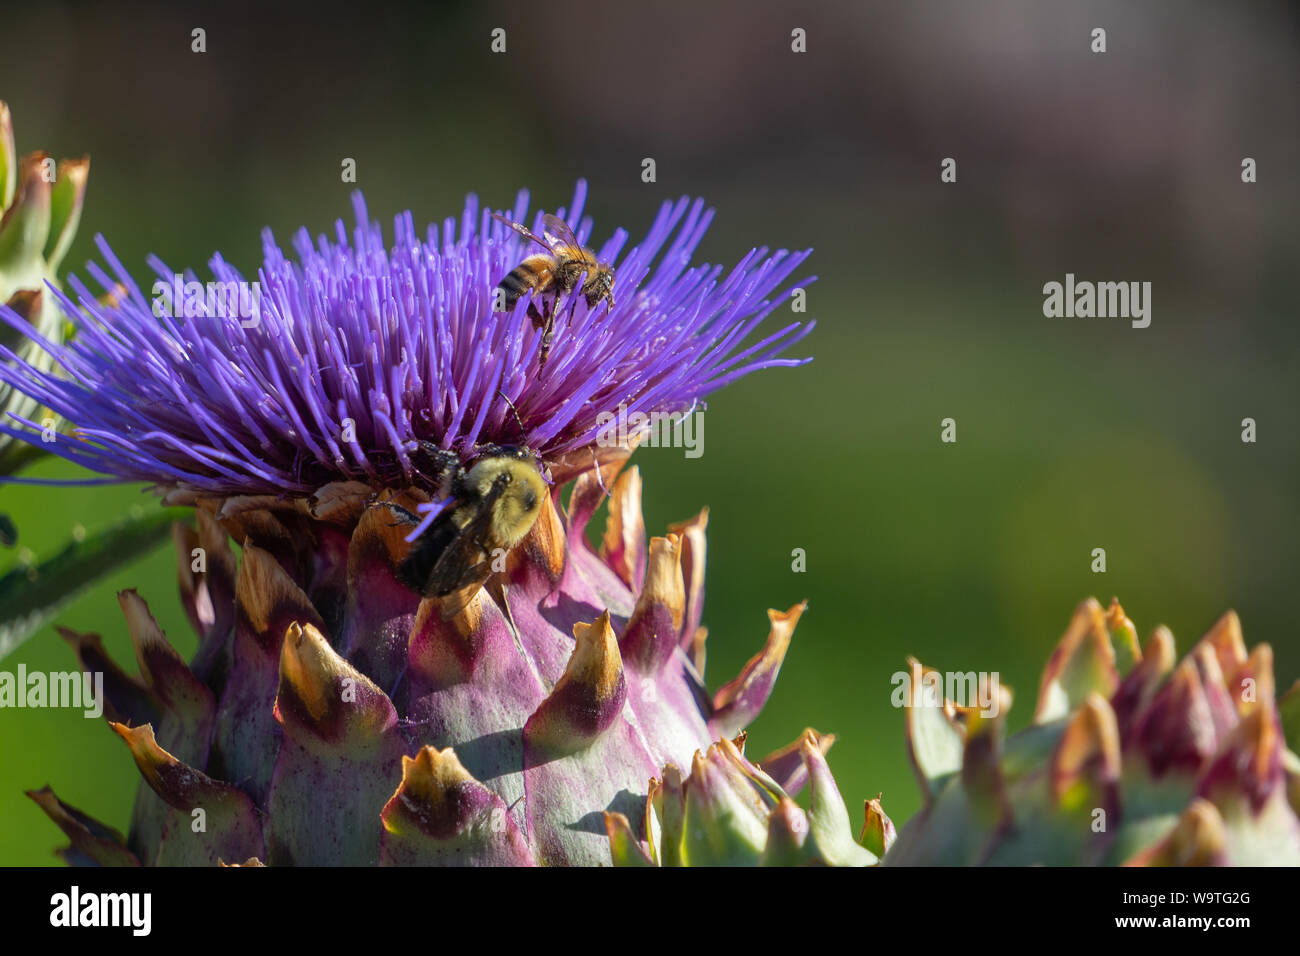 The thistle proved to be irresistible to the bees. They loved it! Stock Photo